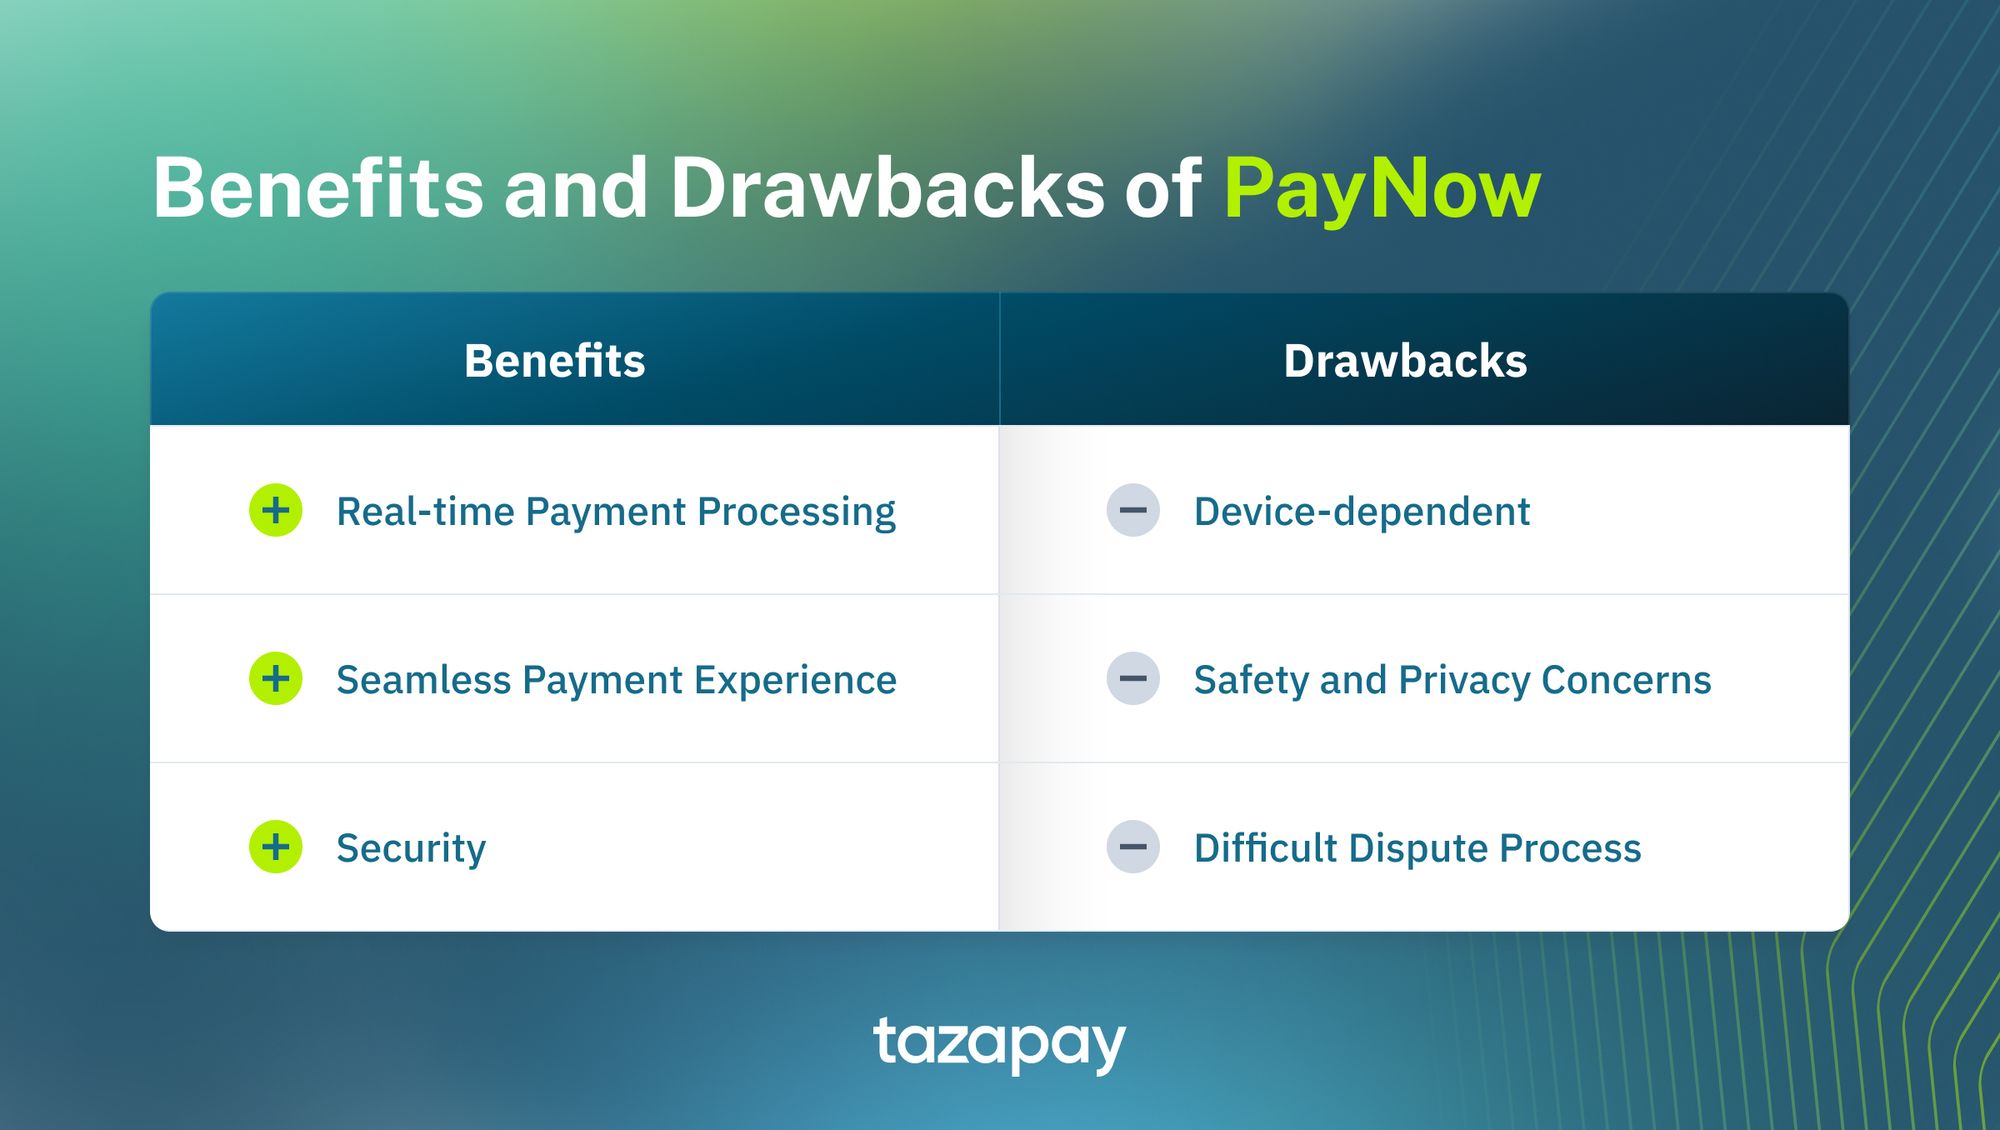 pros and cons of Paynow